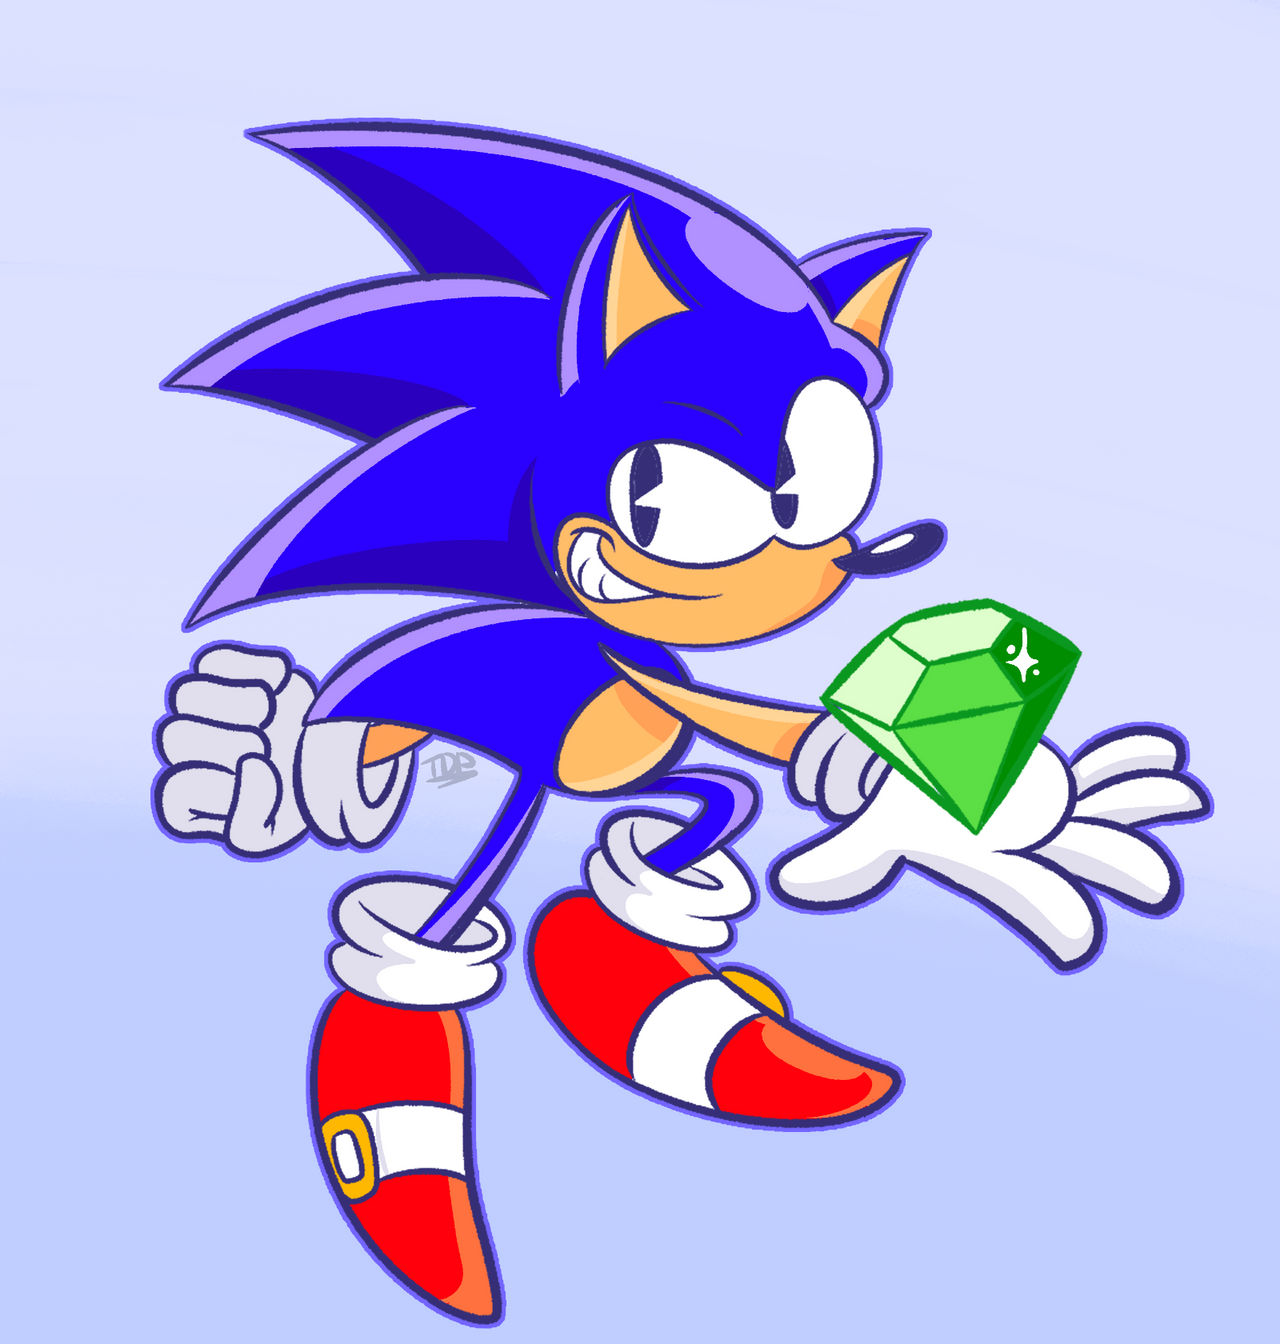 Classic Sonic is COOL Again!!! (Sonic Superstars) 